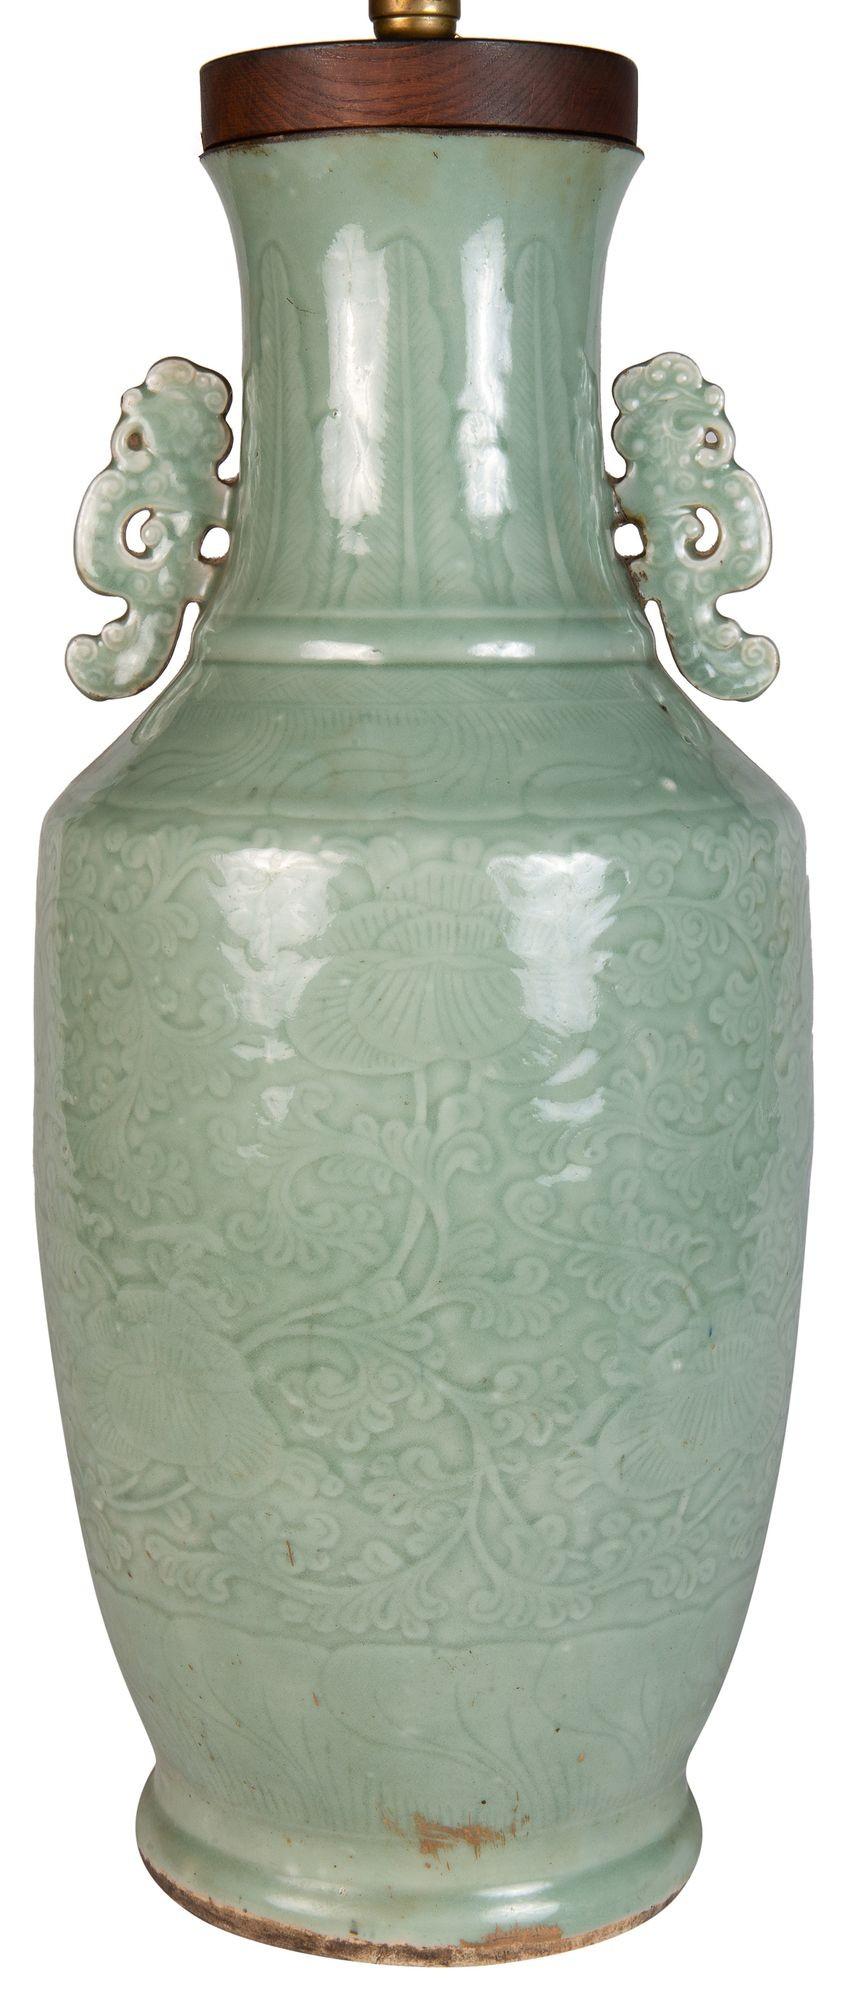 A very impressive early 19th Century, Chinese Celadon porcelain vase/lamp. Having wonderful scrolling embossed decoration to the whole and classical handles to either side.
We can have the vase mounted in a turned gilded wooden stand and rewired as